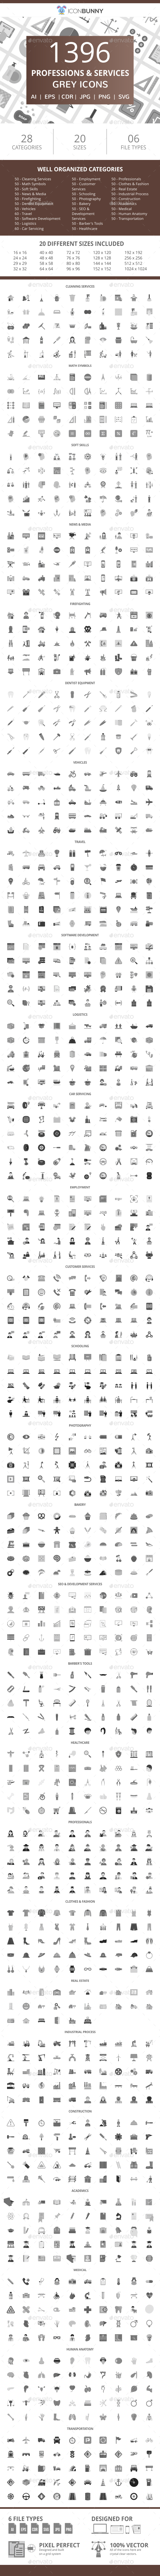 1396 Professions & Services Flat Greyscale Icons